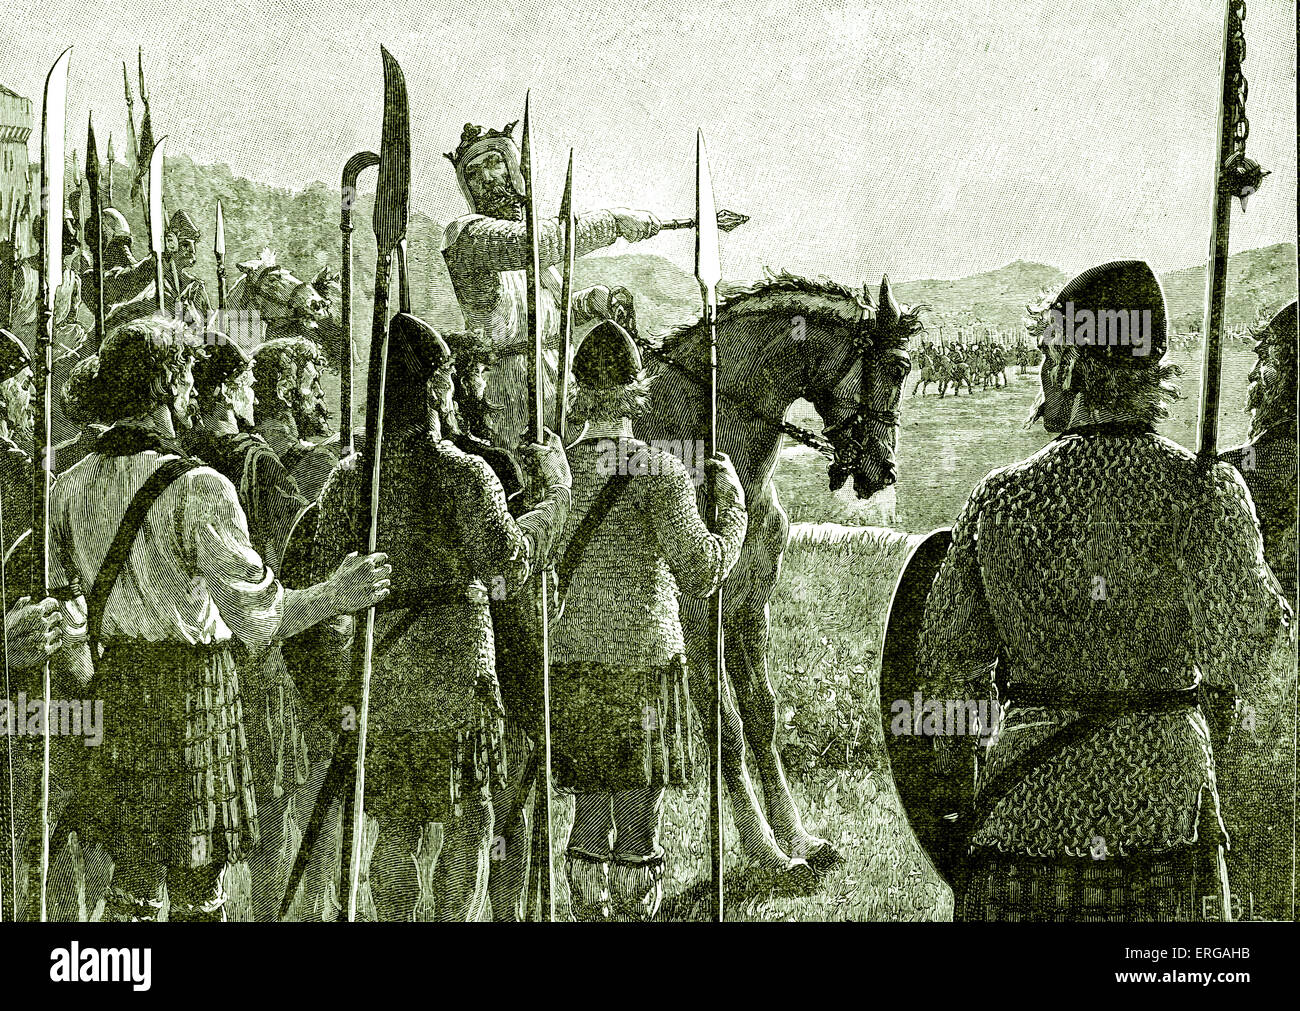 Battle of Bannockburn - Robert the Bruce reviewing his troops before battle. 24 June 1314. Significant Scottish victory in the Stock Photo